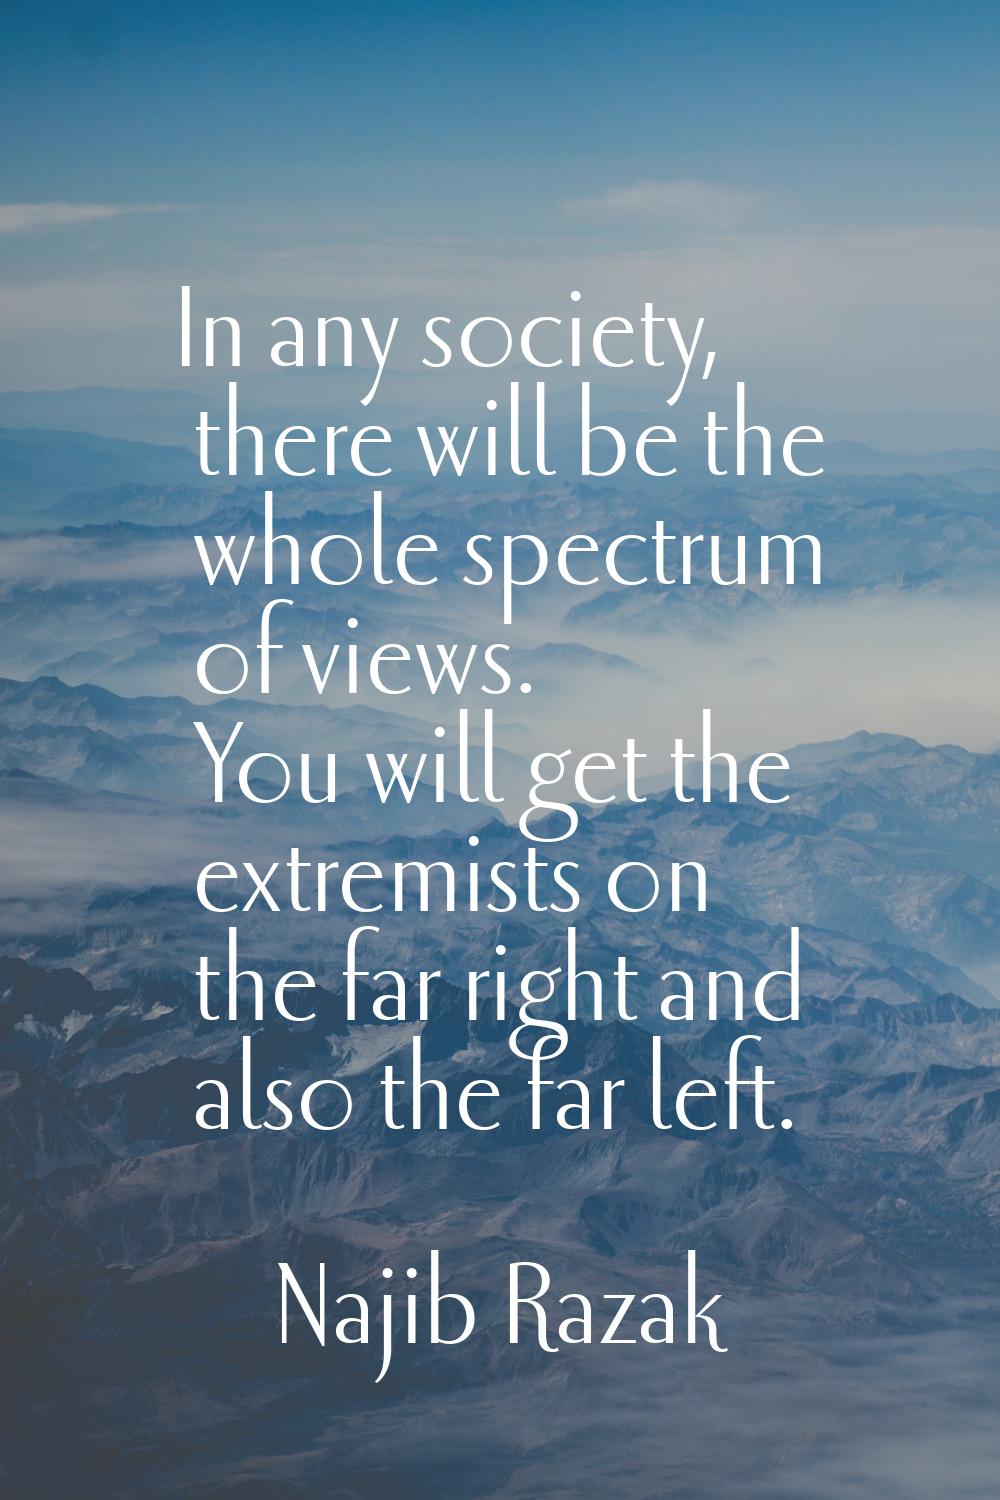 In any society, there will be the whole spectrum of views. You will get the extremists on the far r